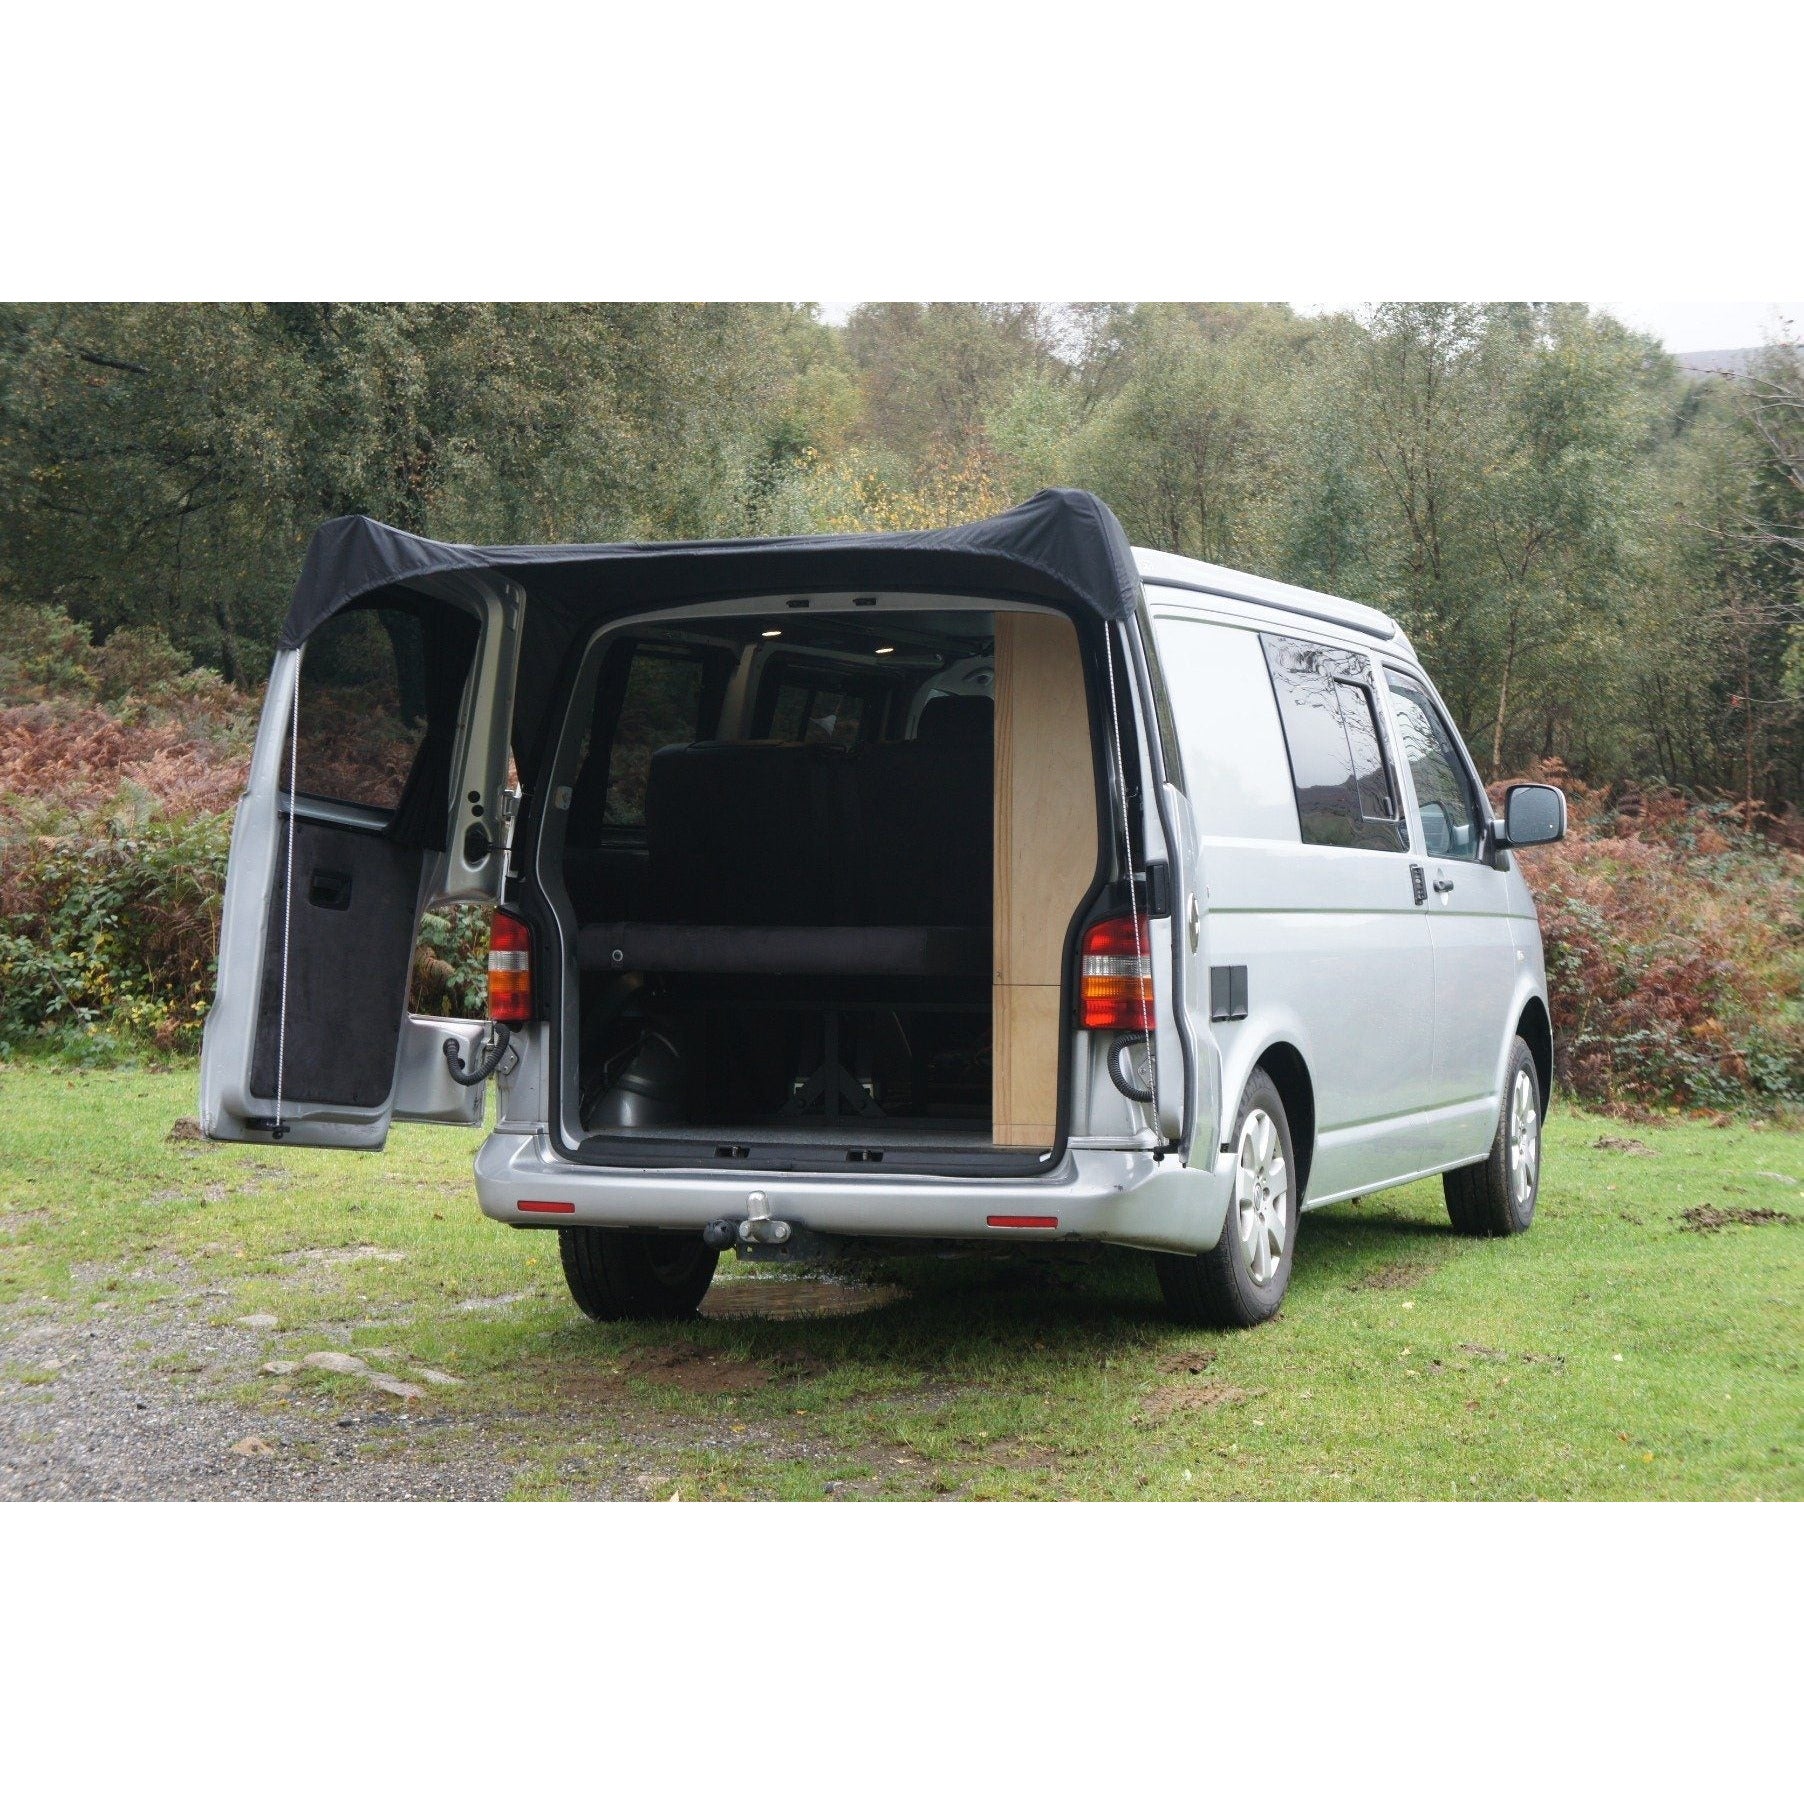 No Tailgate? No problem Barn Door Campervan Awning for VW T5/T6